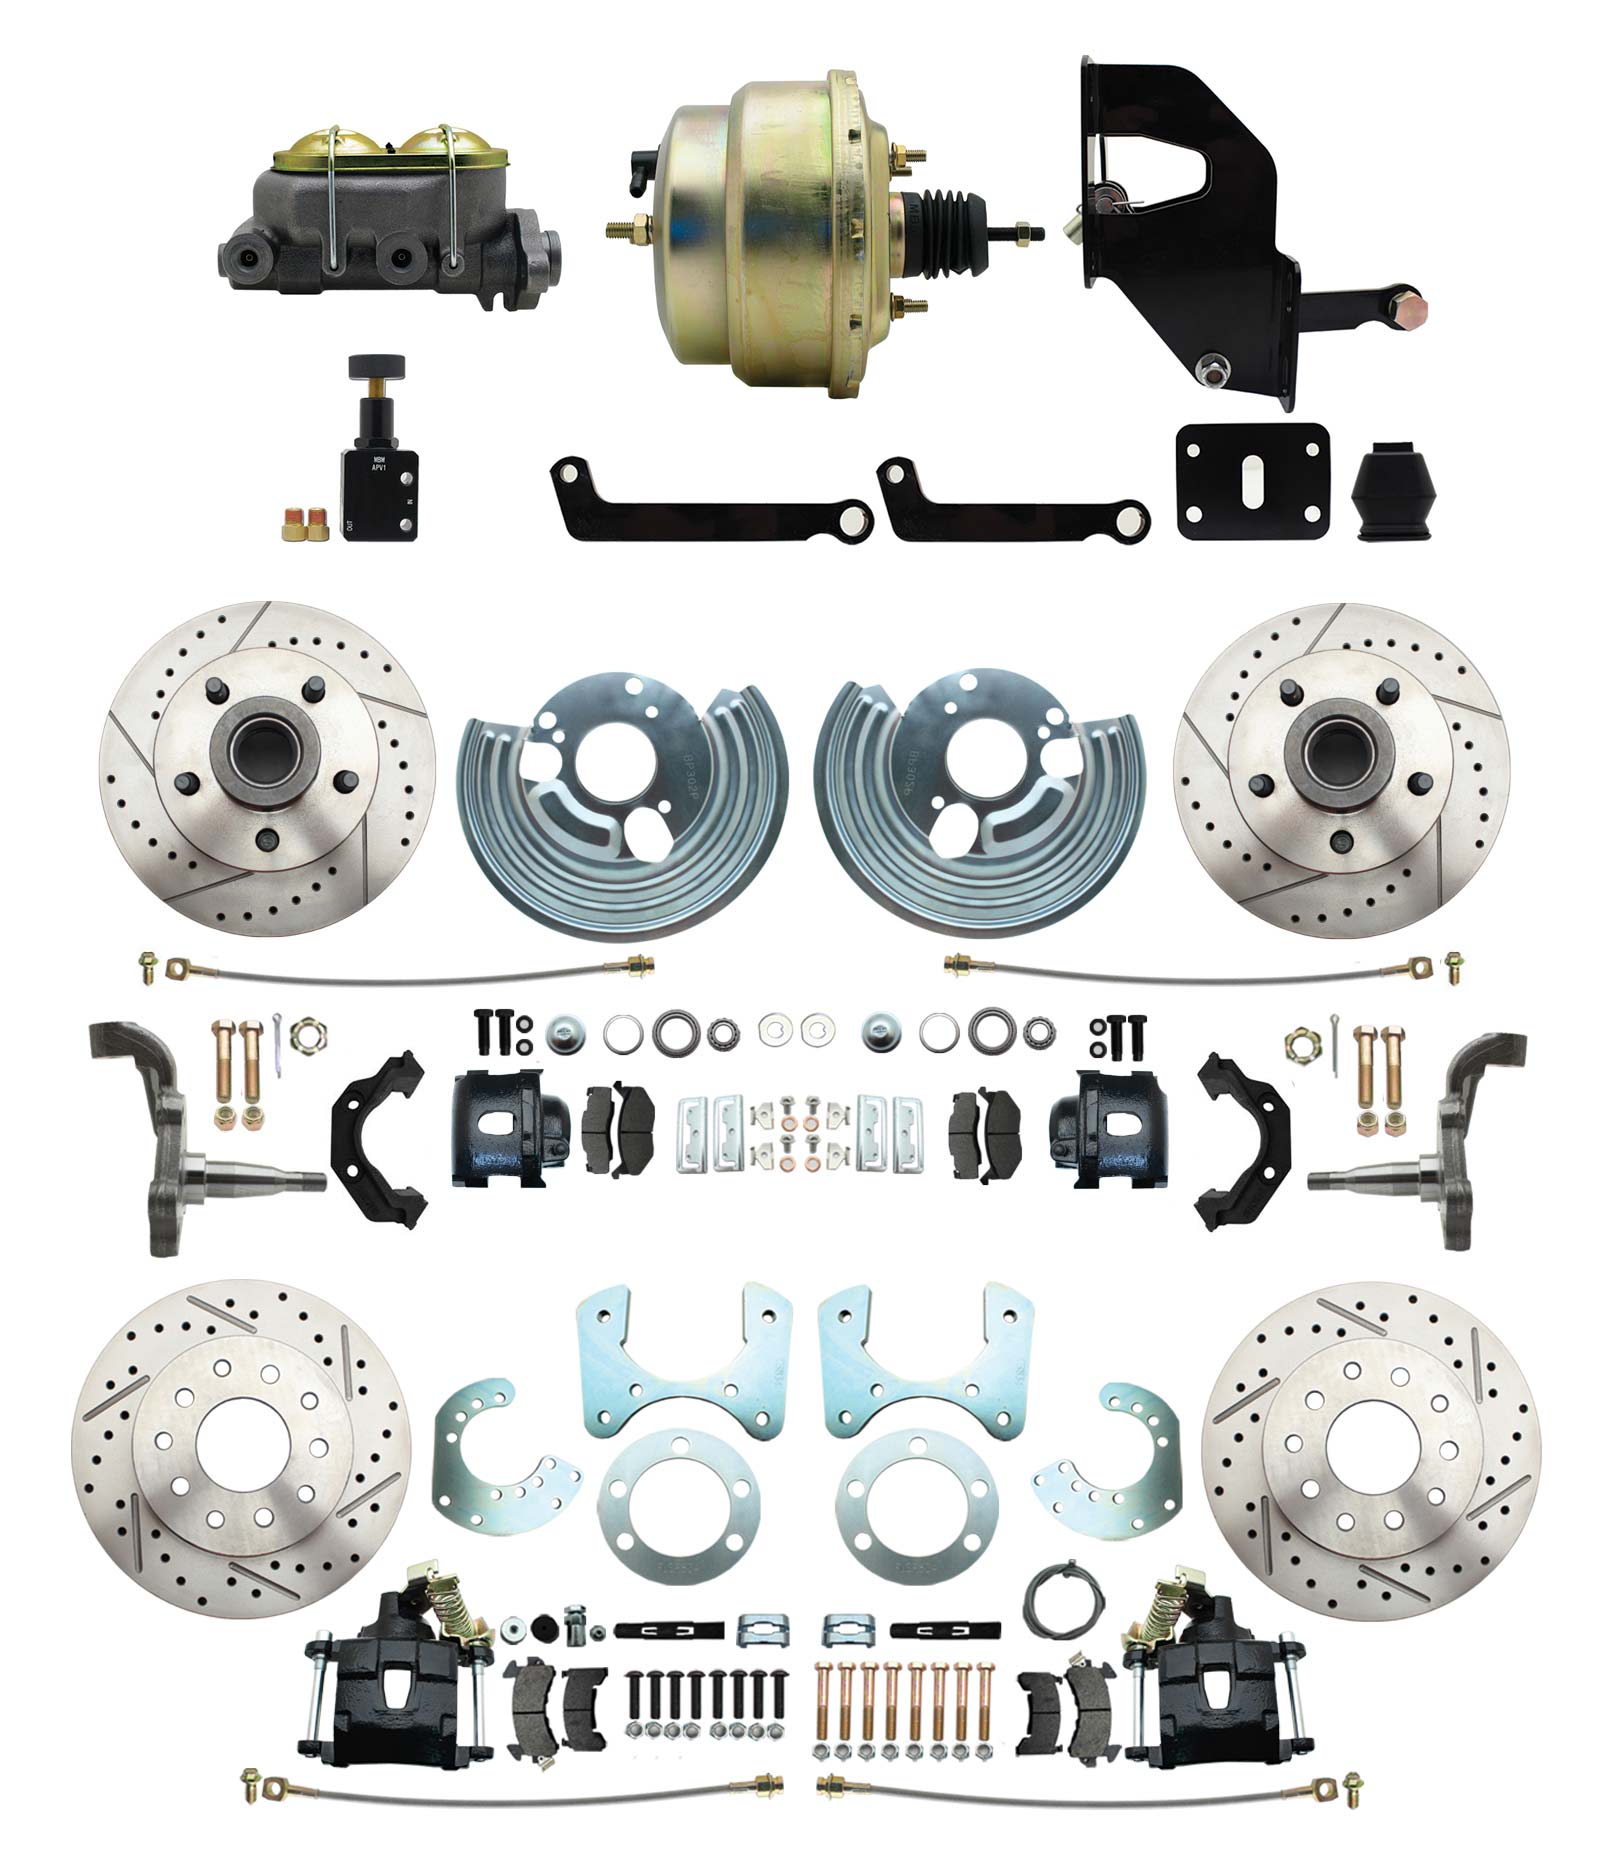 1962-72 Mopar B&E Body Front & Rear Disc Brake Conversion Kit W/ Drilled & Slotted Rotors & Powder Coated Black Calipers ( Charger, Challenger, Coronet) W/ 8 Dual Zinc Booster Conversion Kit W/ Adjustable Valve